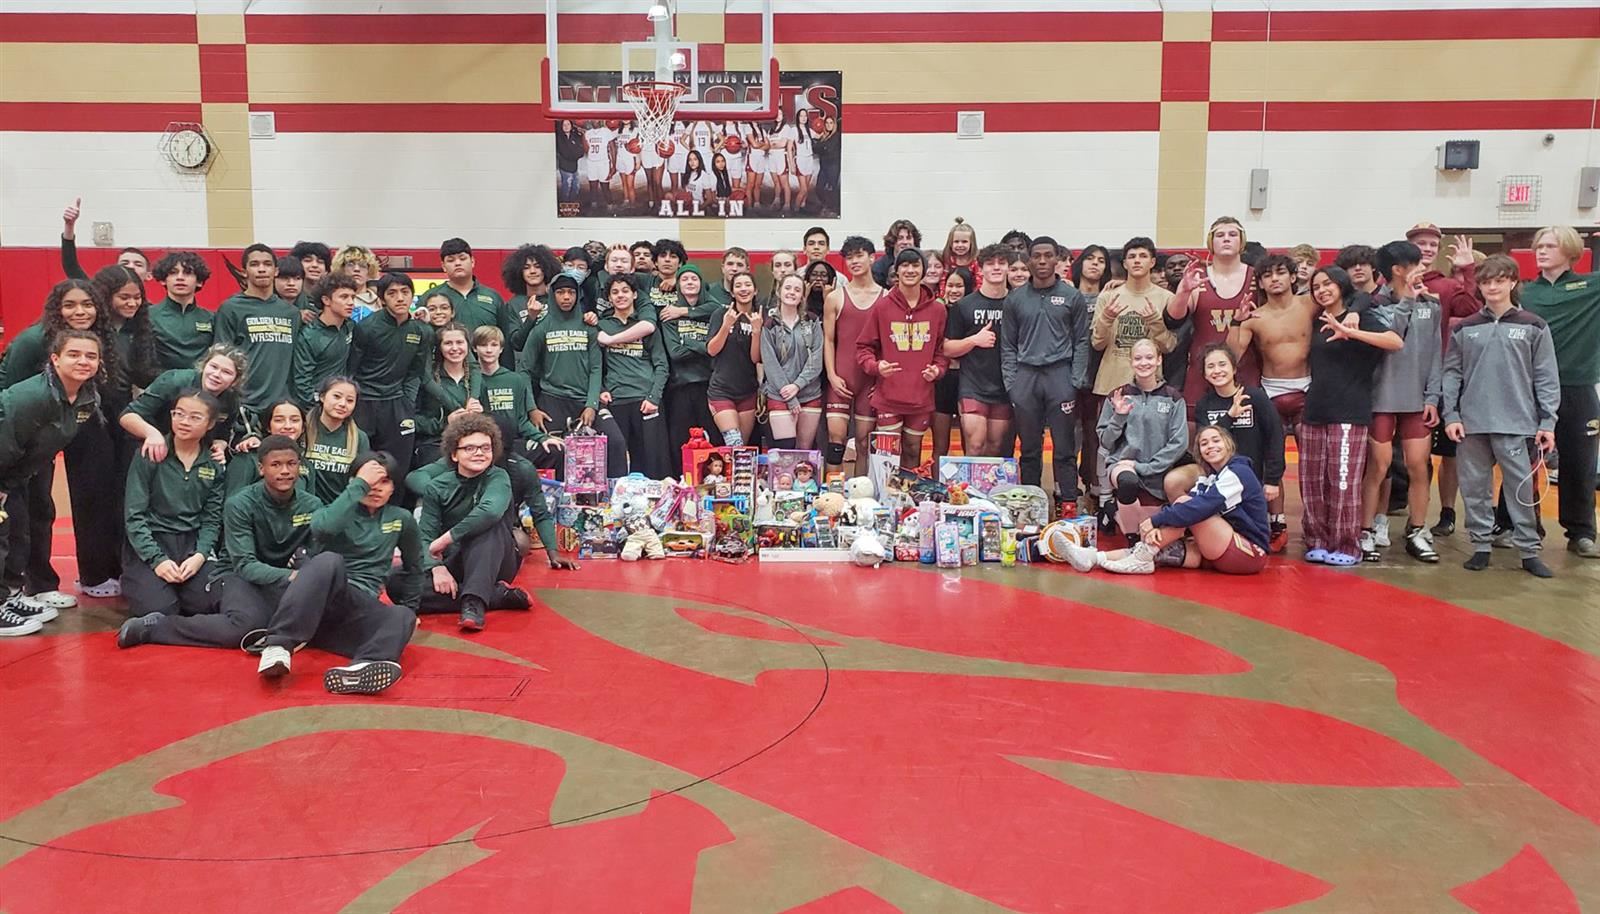 Cypress Falls and Cypress Woods wrestling participates in CALI BEAR toy drive.